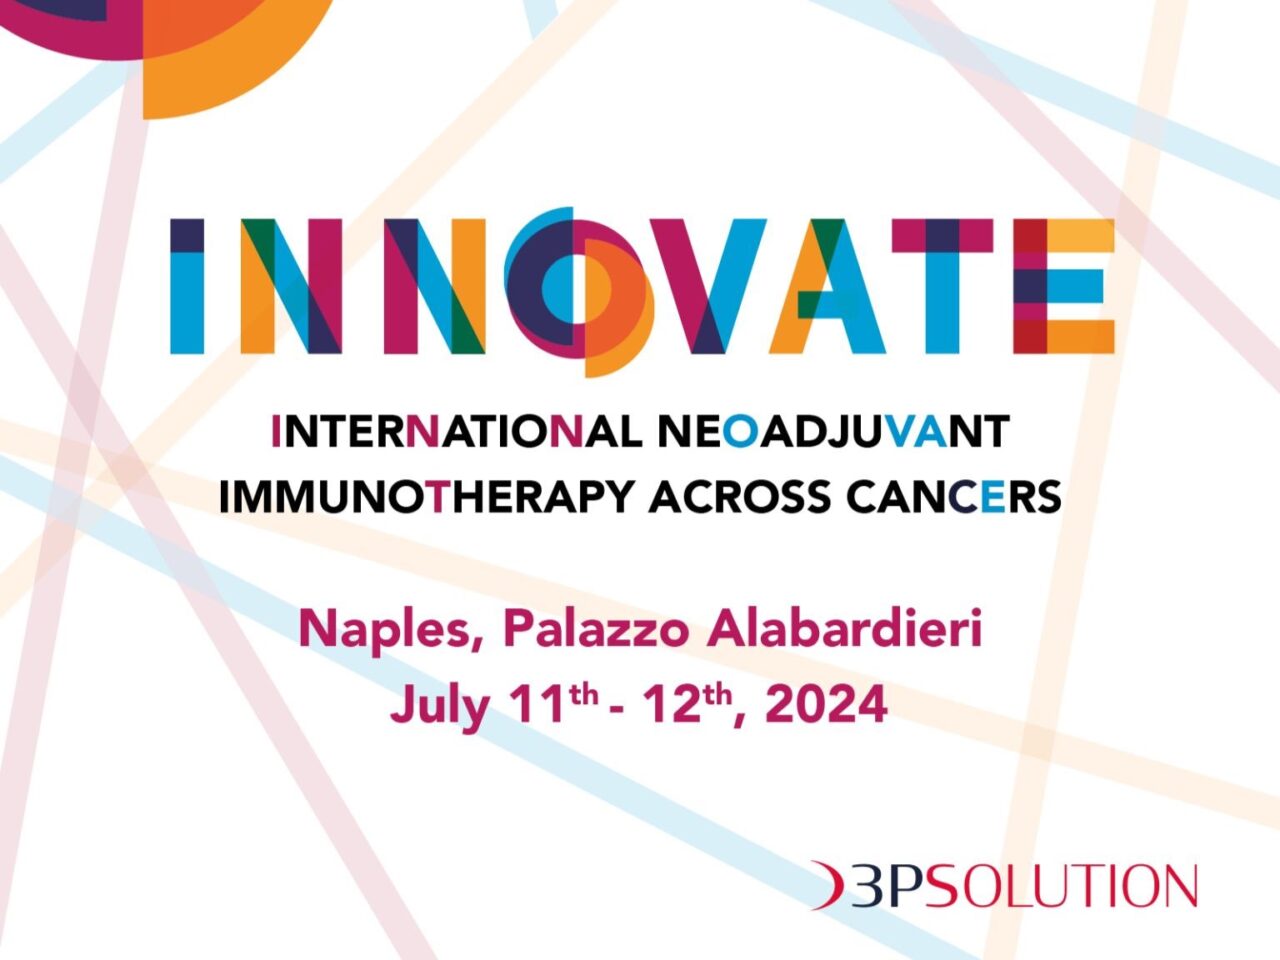 International Neoadjuvant Immunotherapy Across Cancers Congress has been accredited by EACCME – 3P Solution